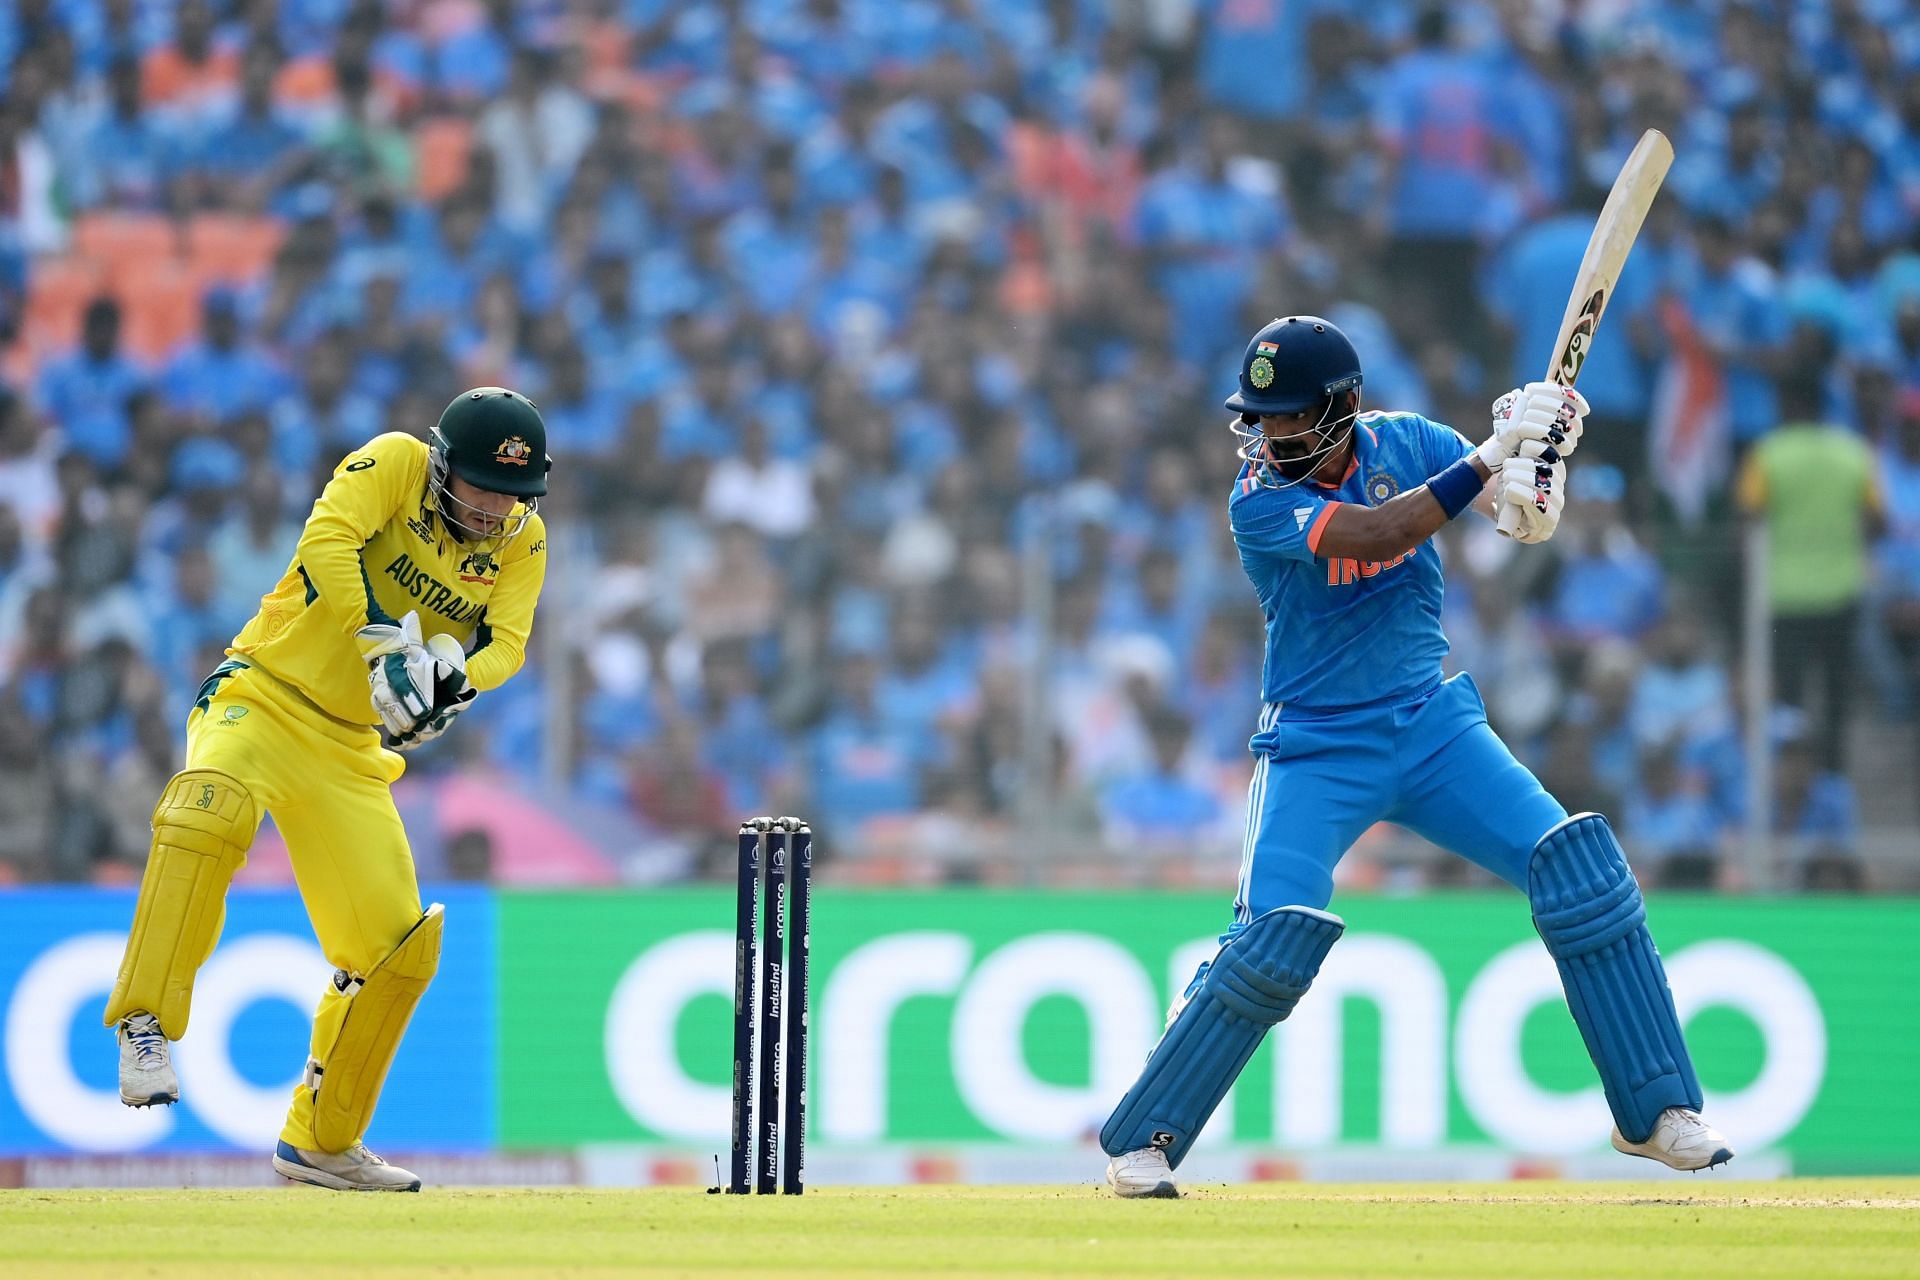 KL Rahul in action in the World Cup.